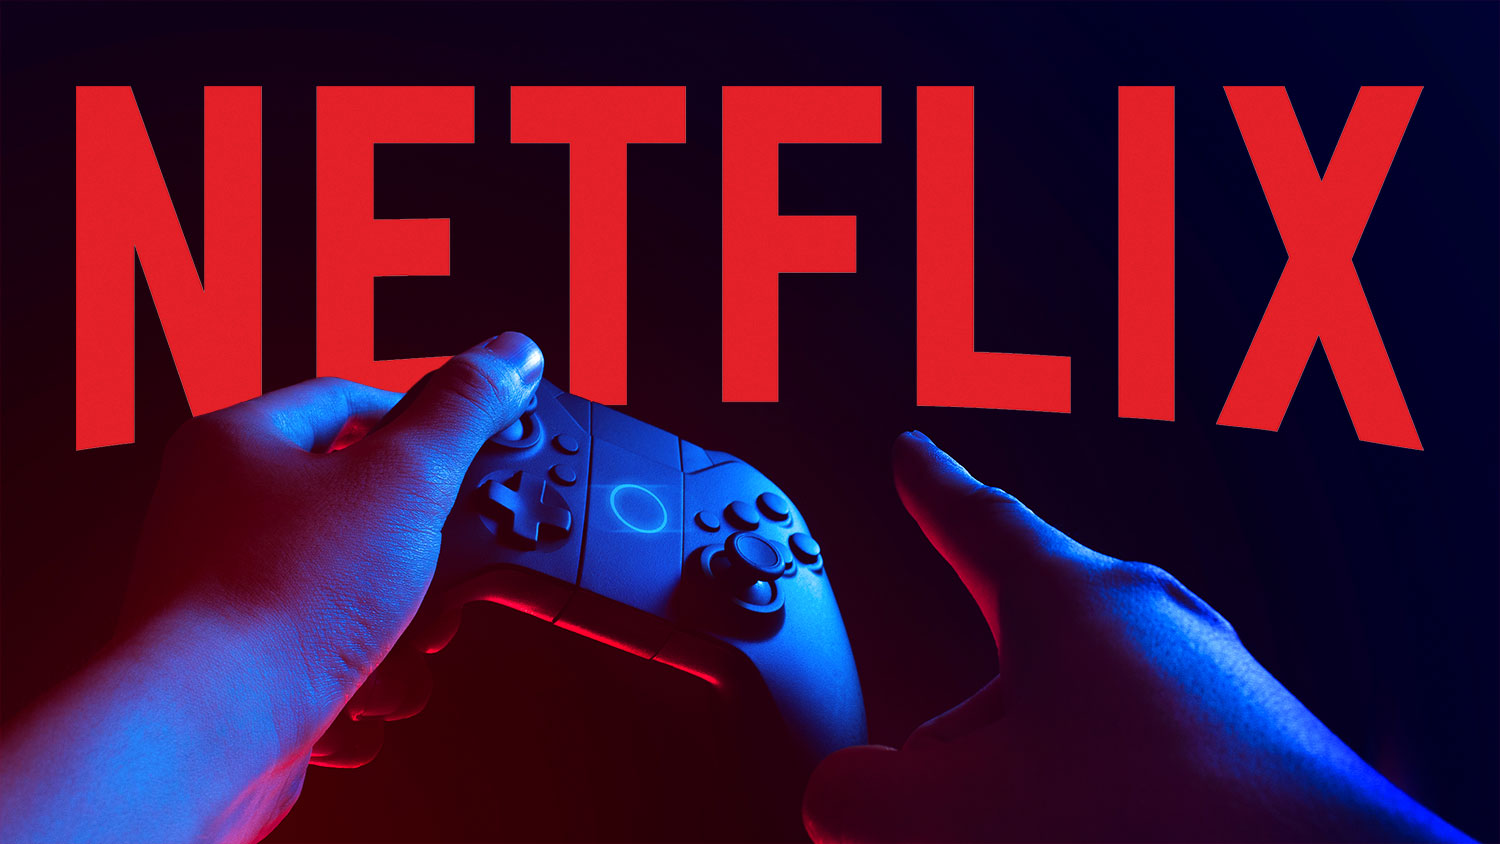 netflix gaming begins limited testing in poland featuring two stranger things games!